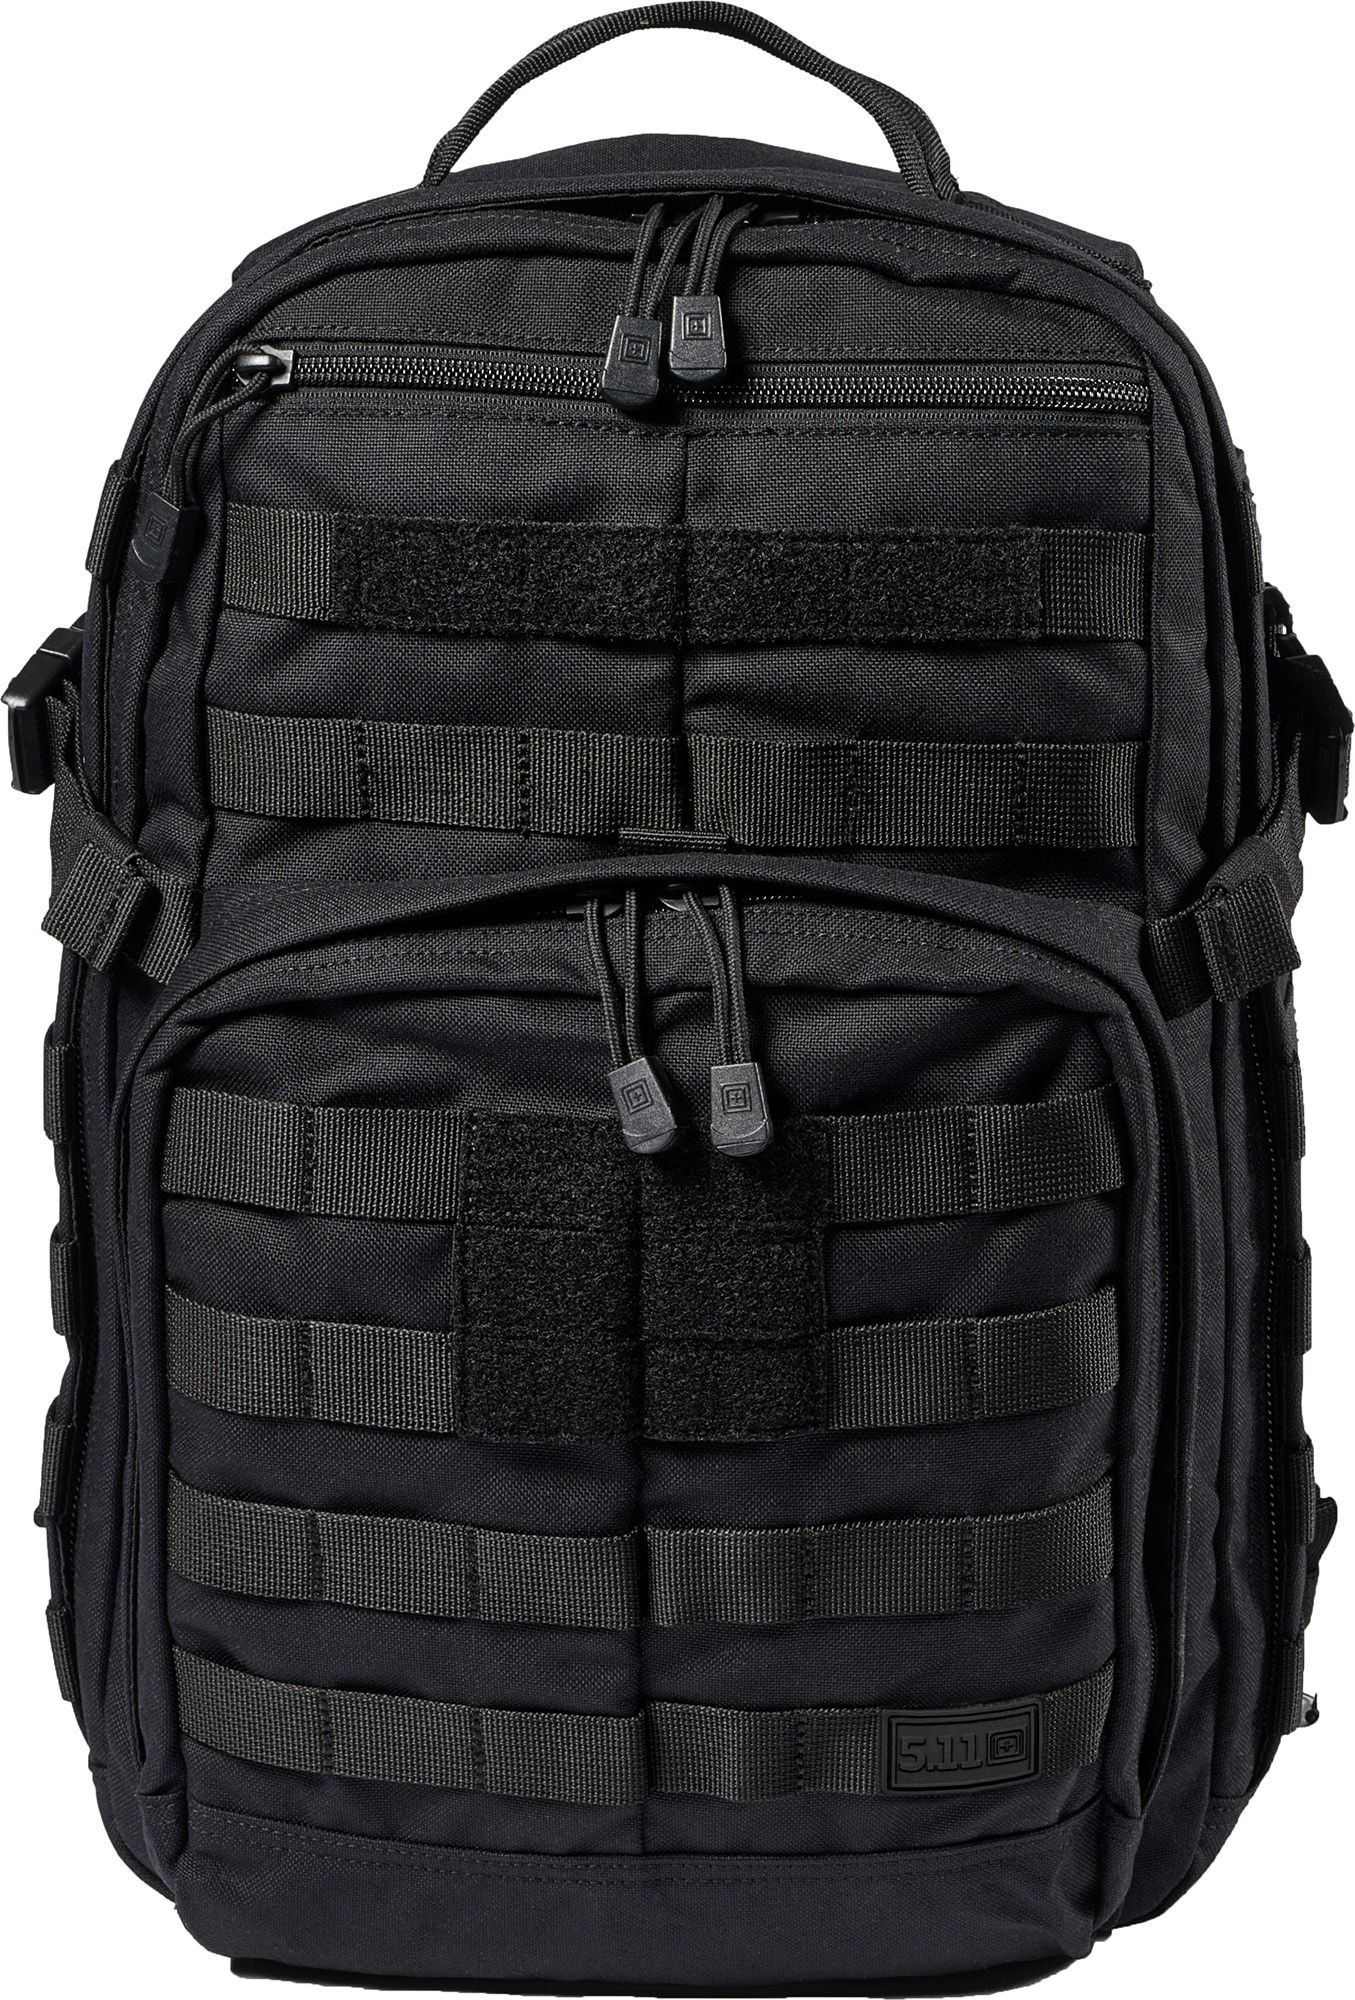 5.11 Tactical Rush12 2.0 24L Backpack